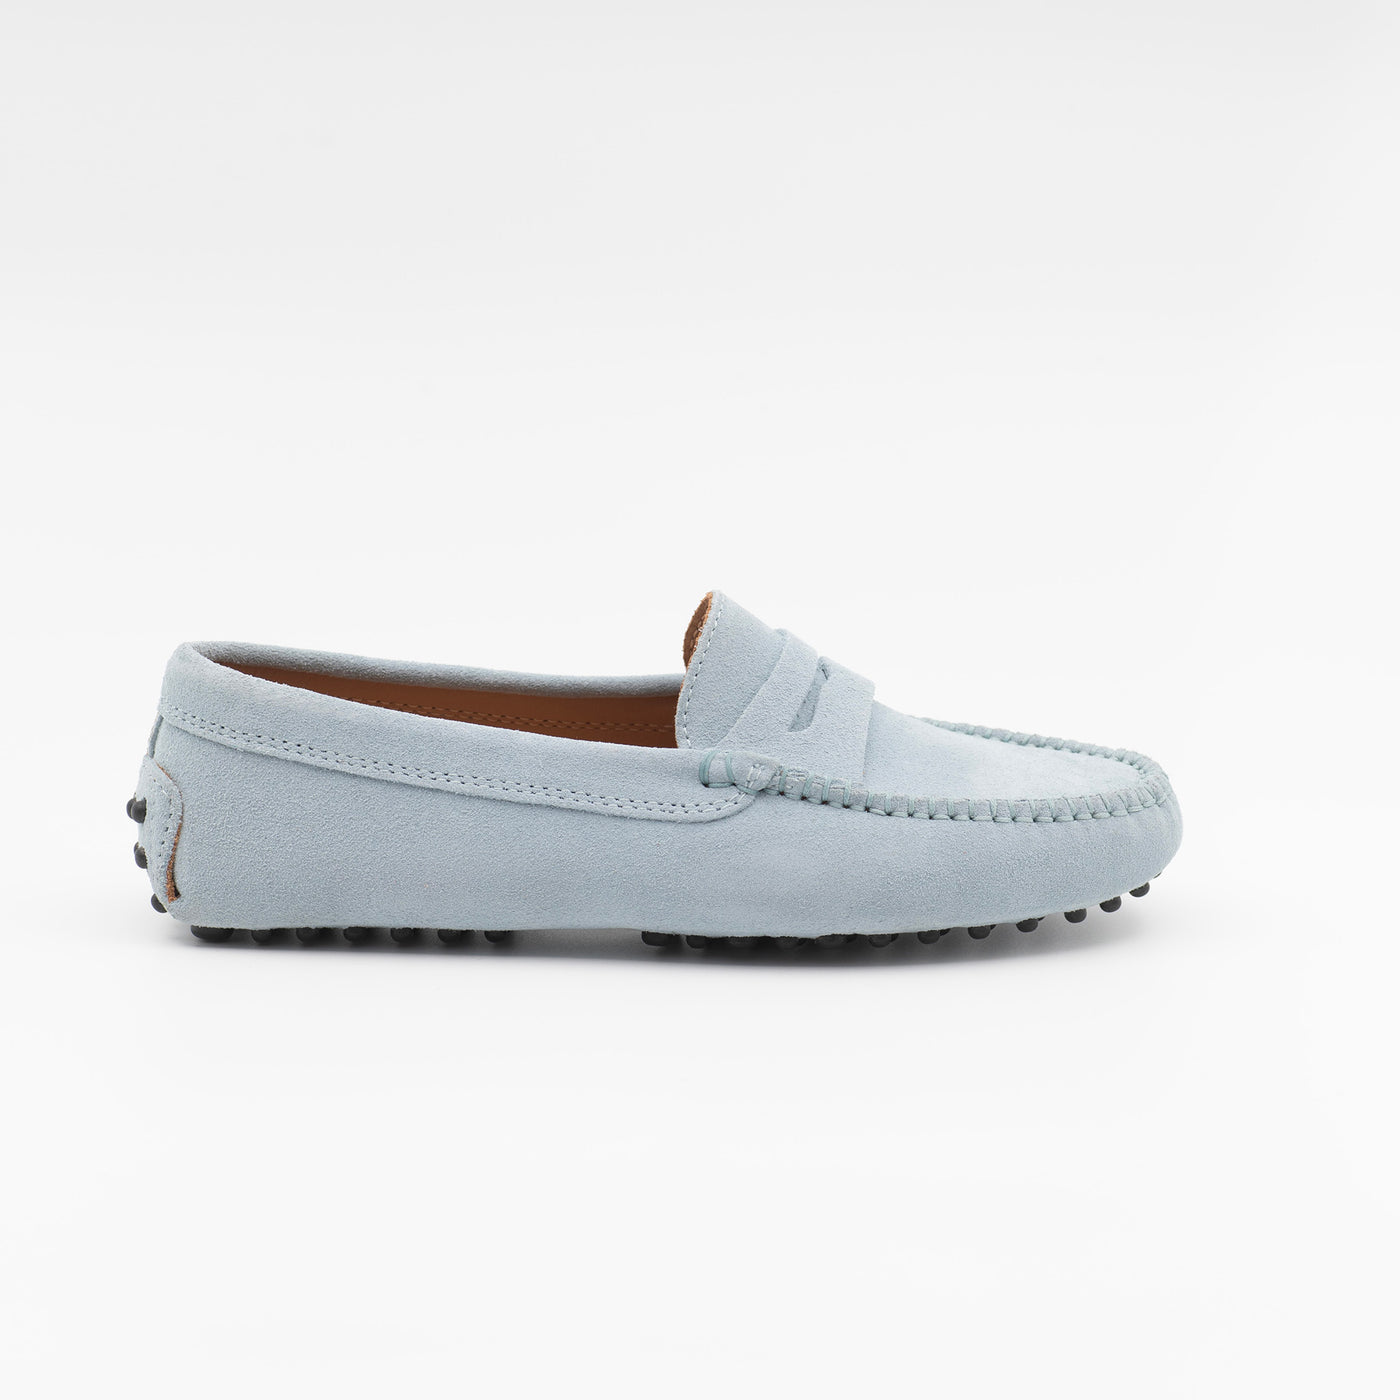 Gommino loafer in light blue suede